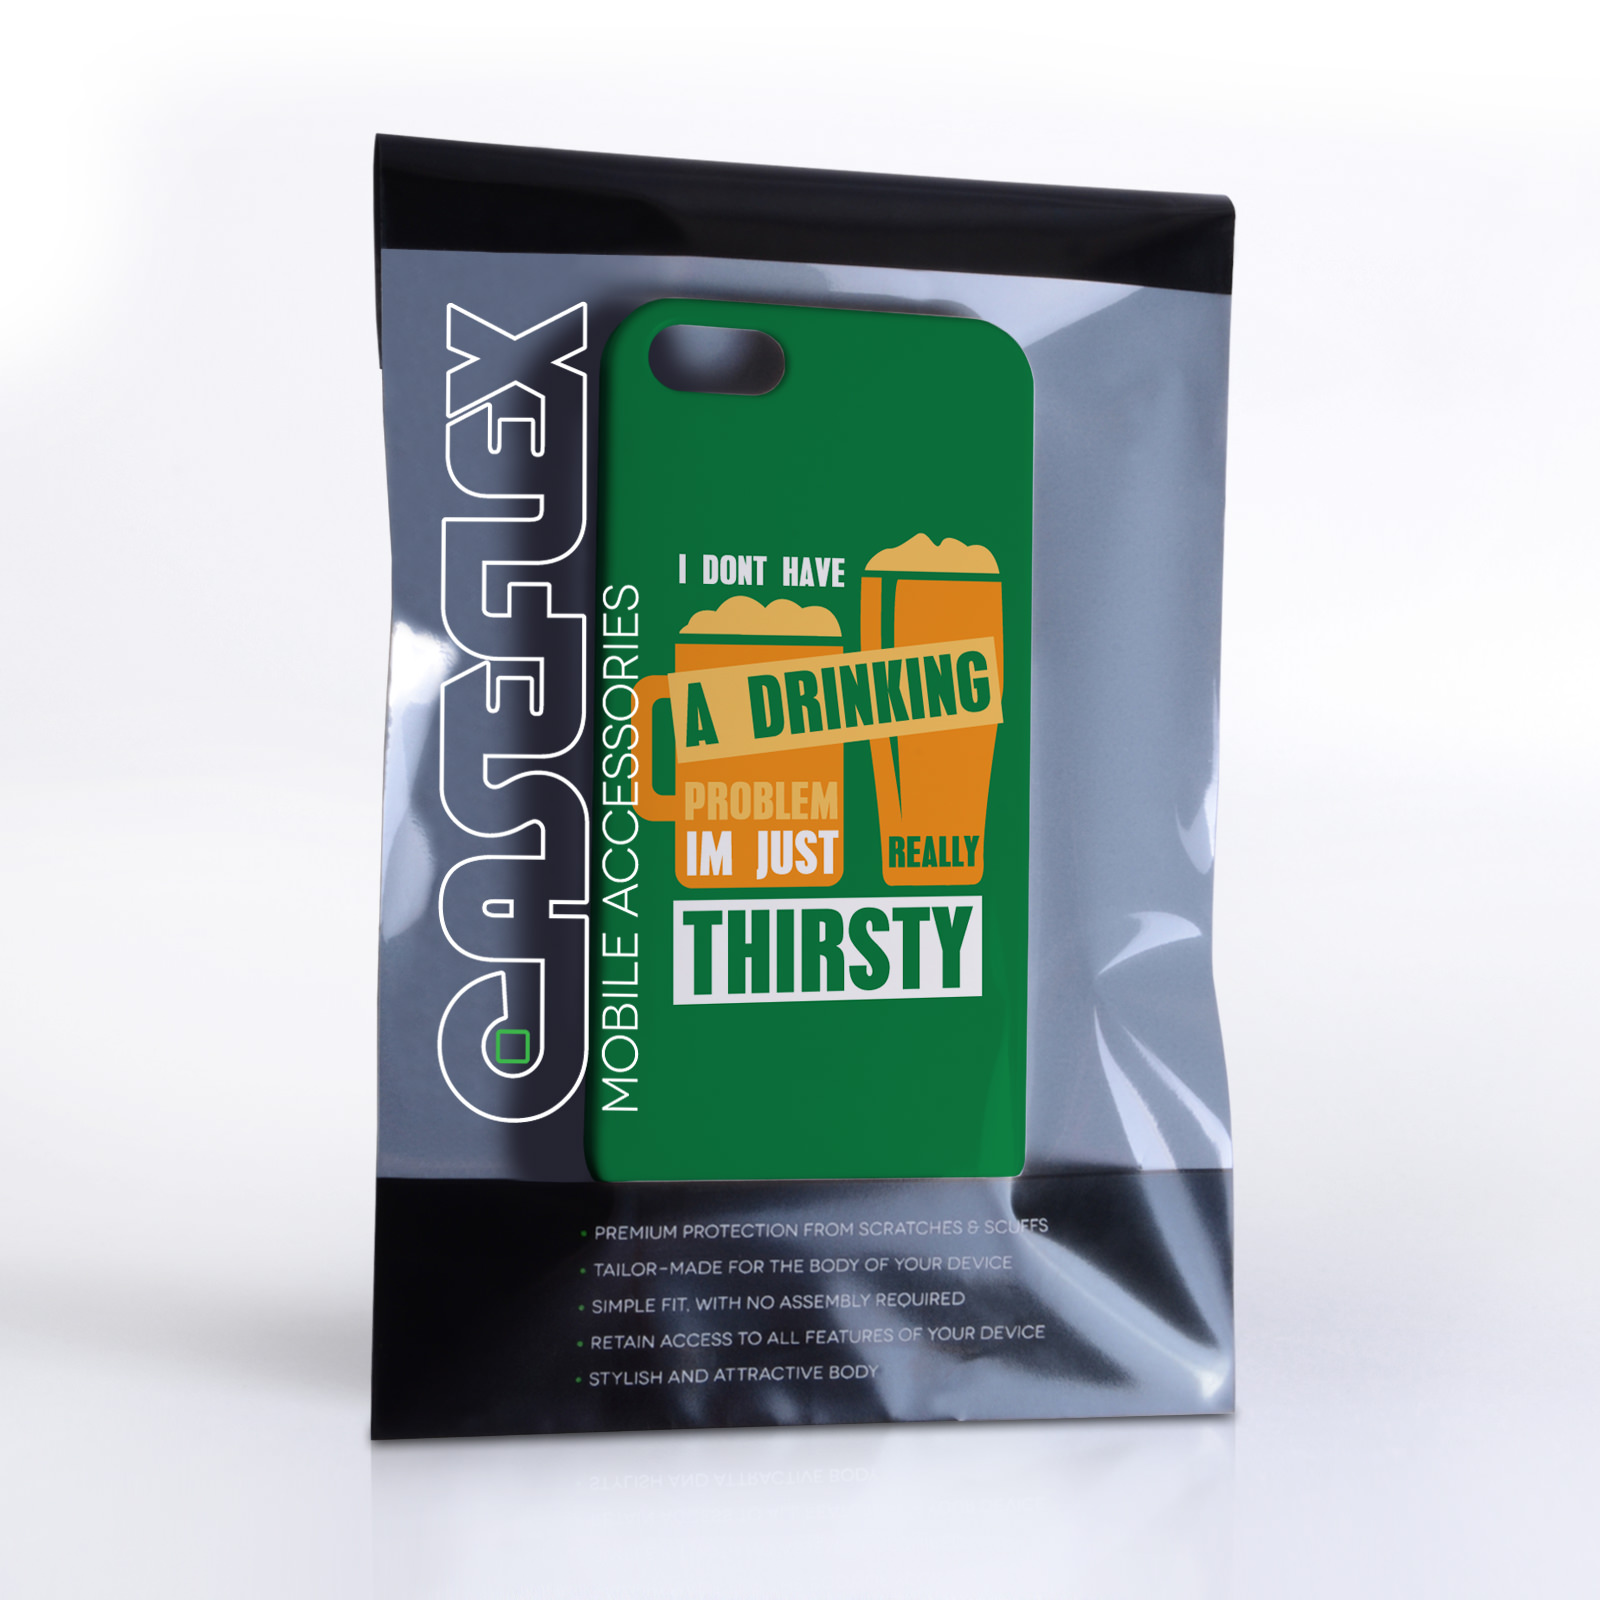 Caseflex iPhone SE ‘Really Thirsty’ Quote Hard Case – Green